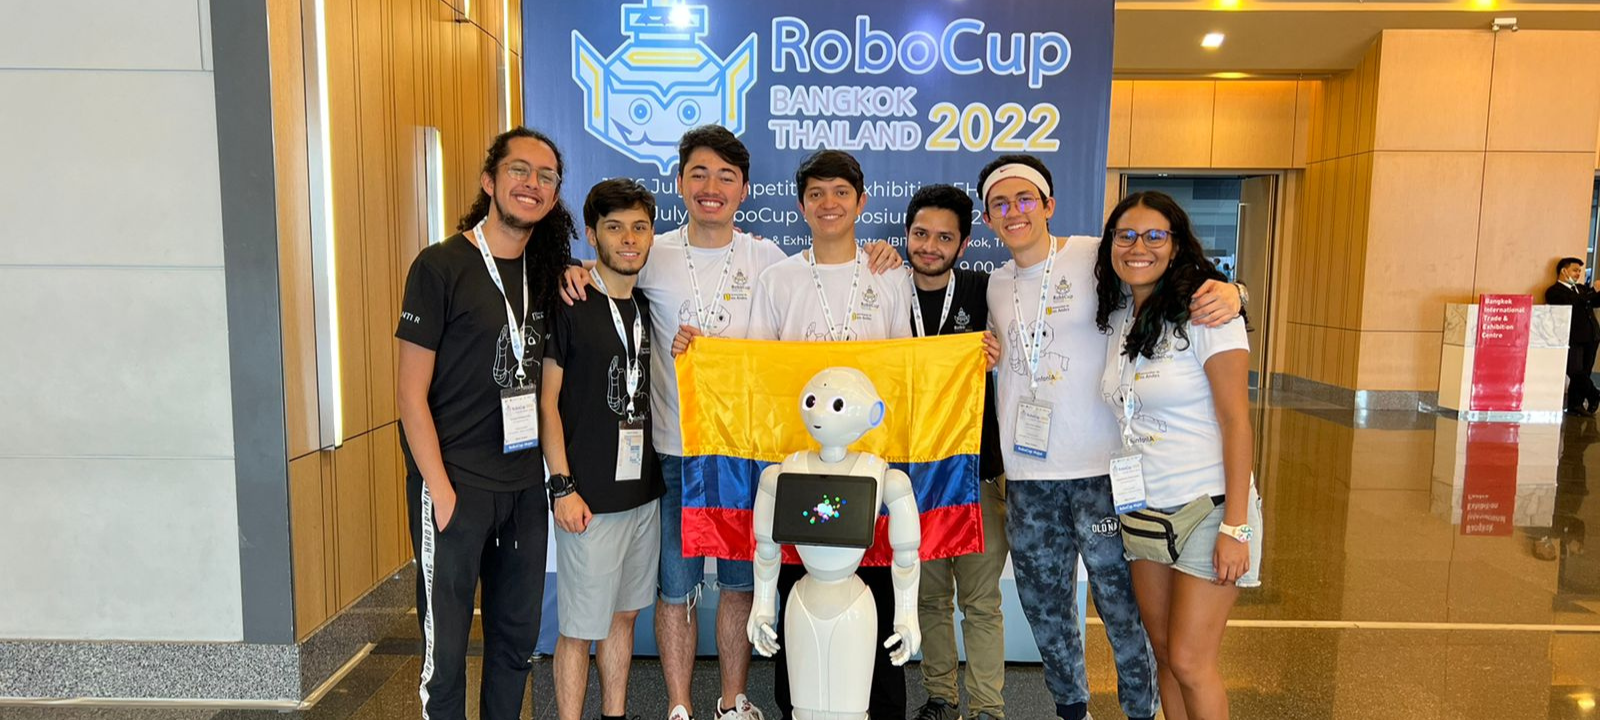 Uniandinos engineers win second place in the RoboCup 2022 Robotics World Cup 